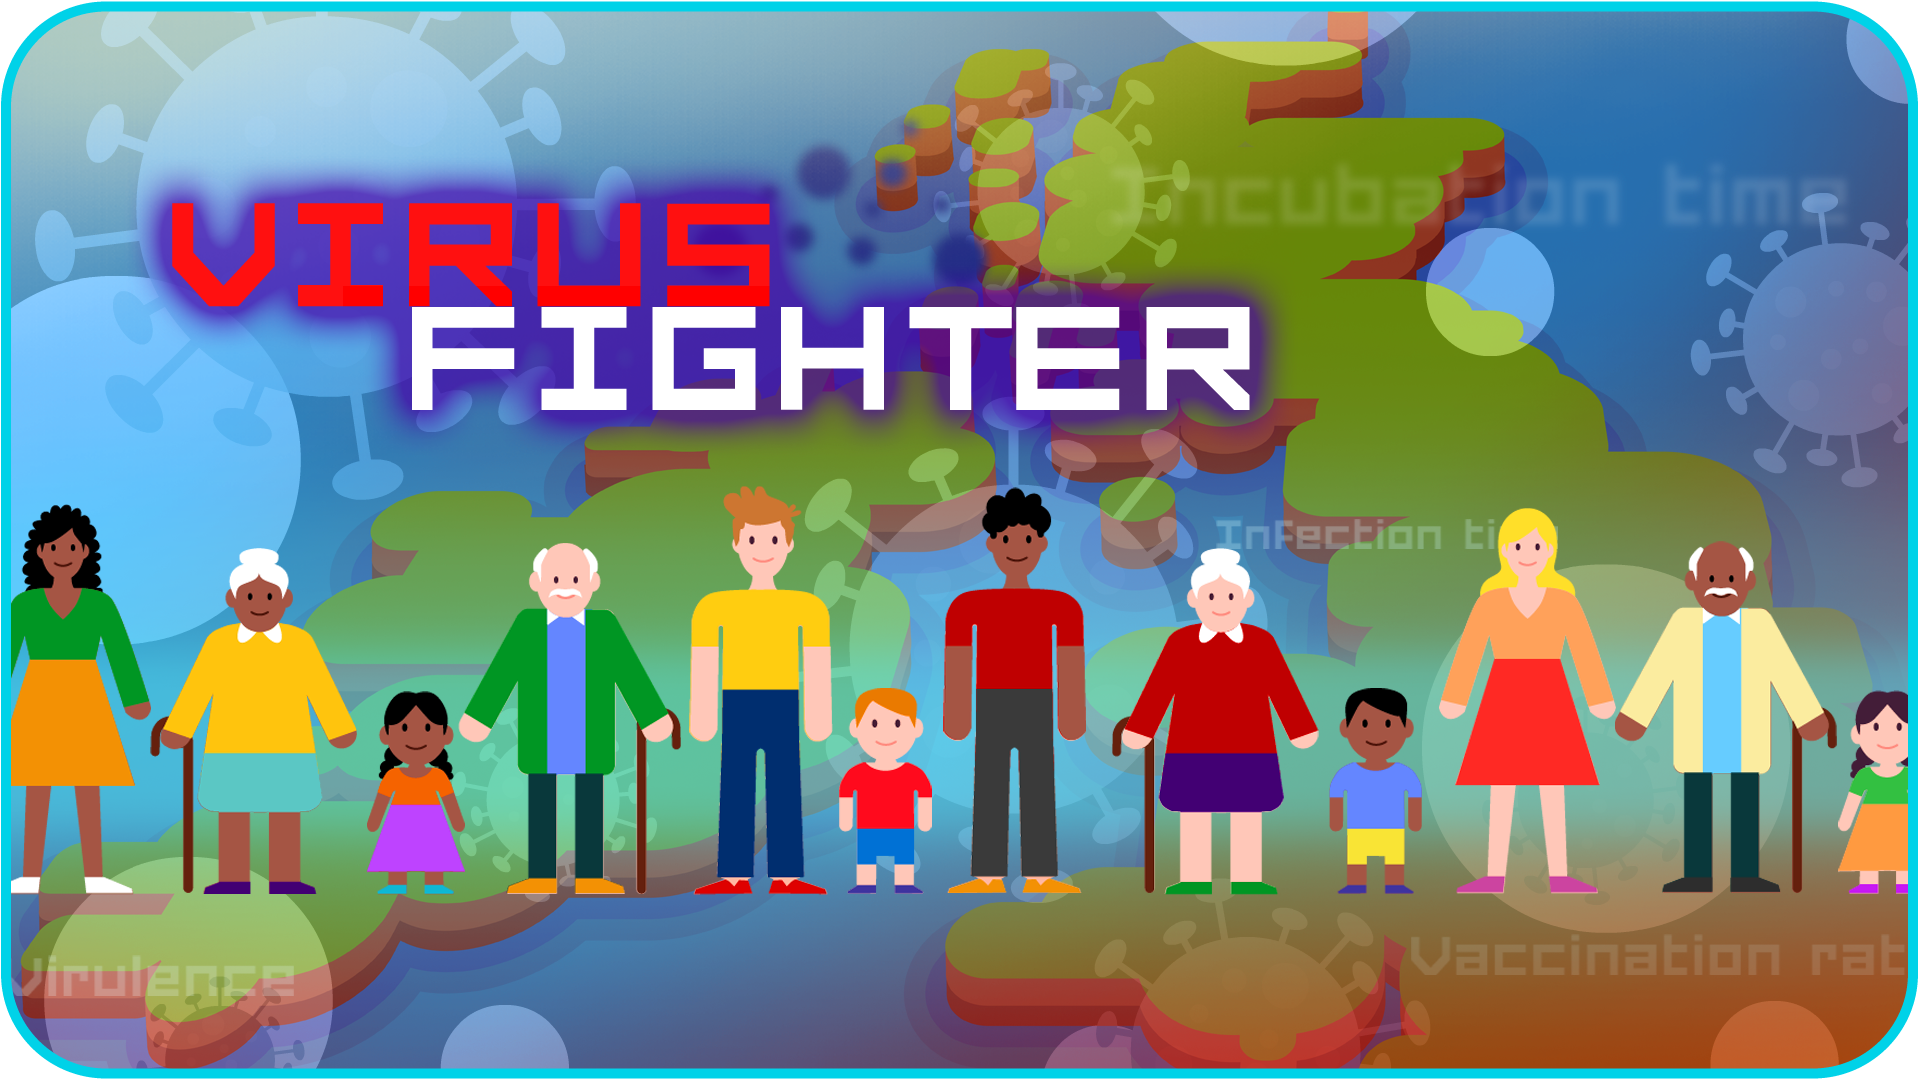 The image is of a tilted UK map with a banner of cartoon people of a range of appearances, and large virus shapes dotted around the image. The words Virus Fighter are in the top left corner.